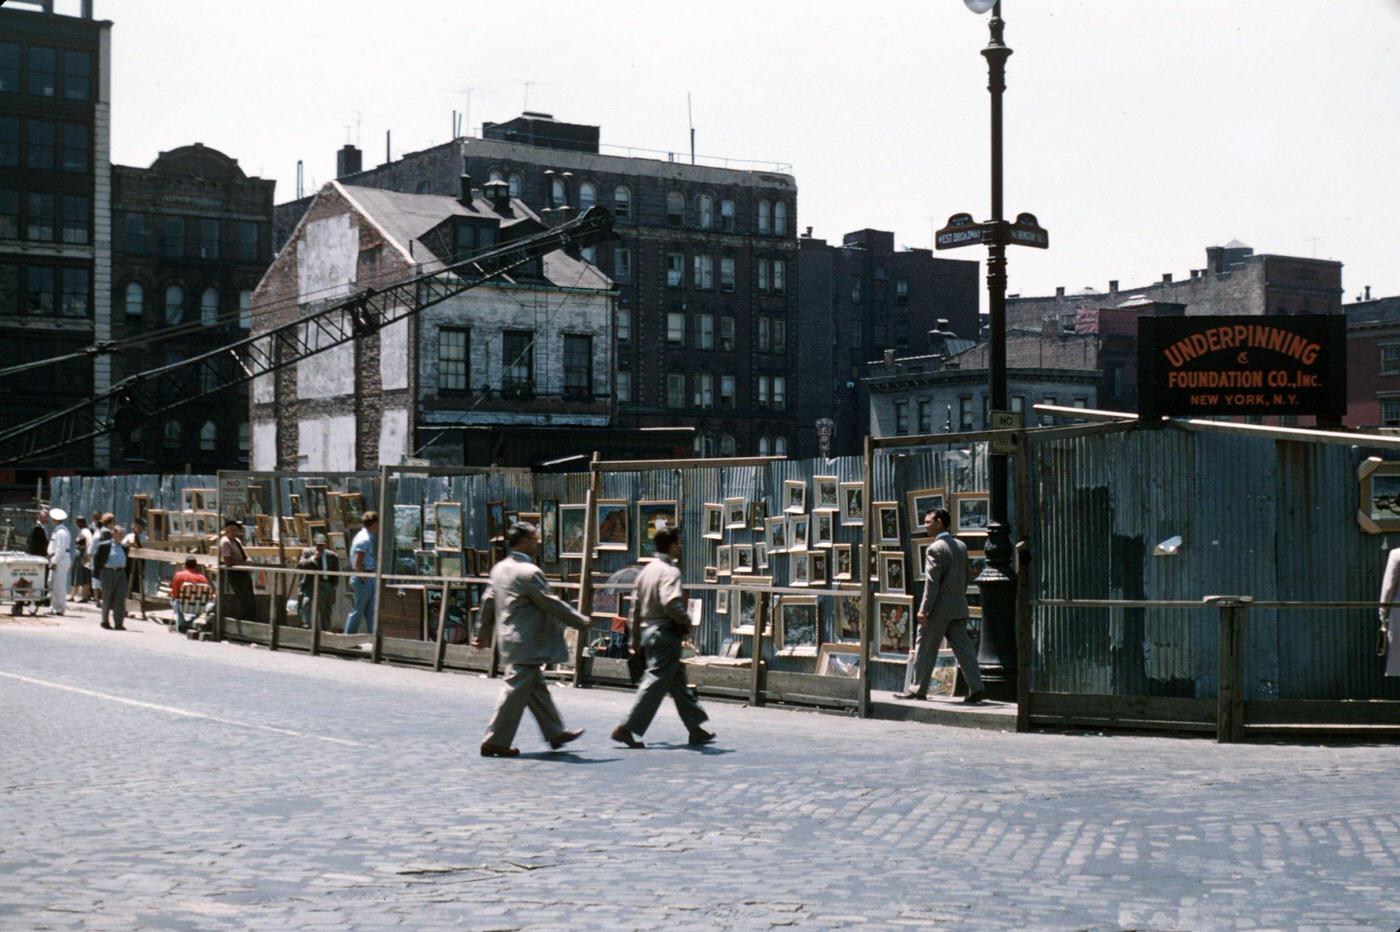 Construction Site On West Broadway And Washington Square South, Manhattan, 1965